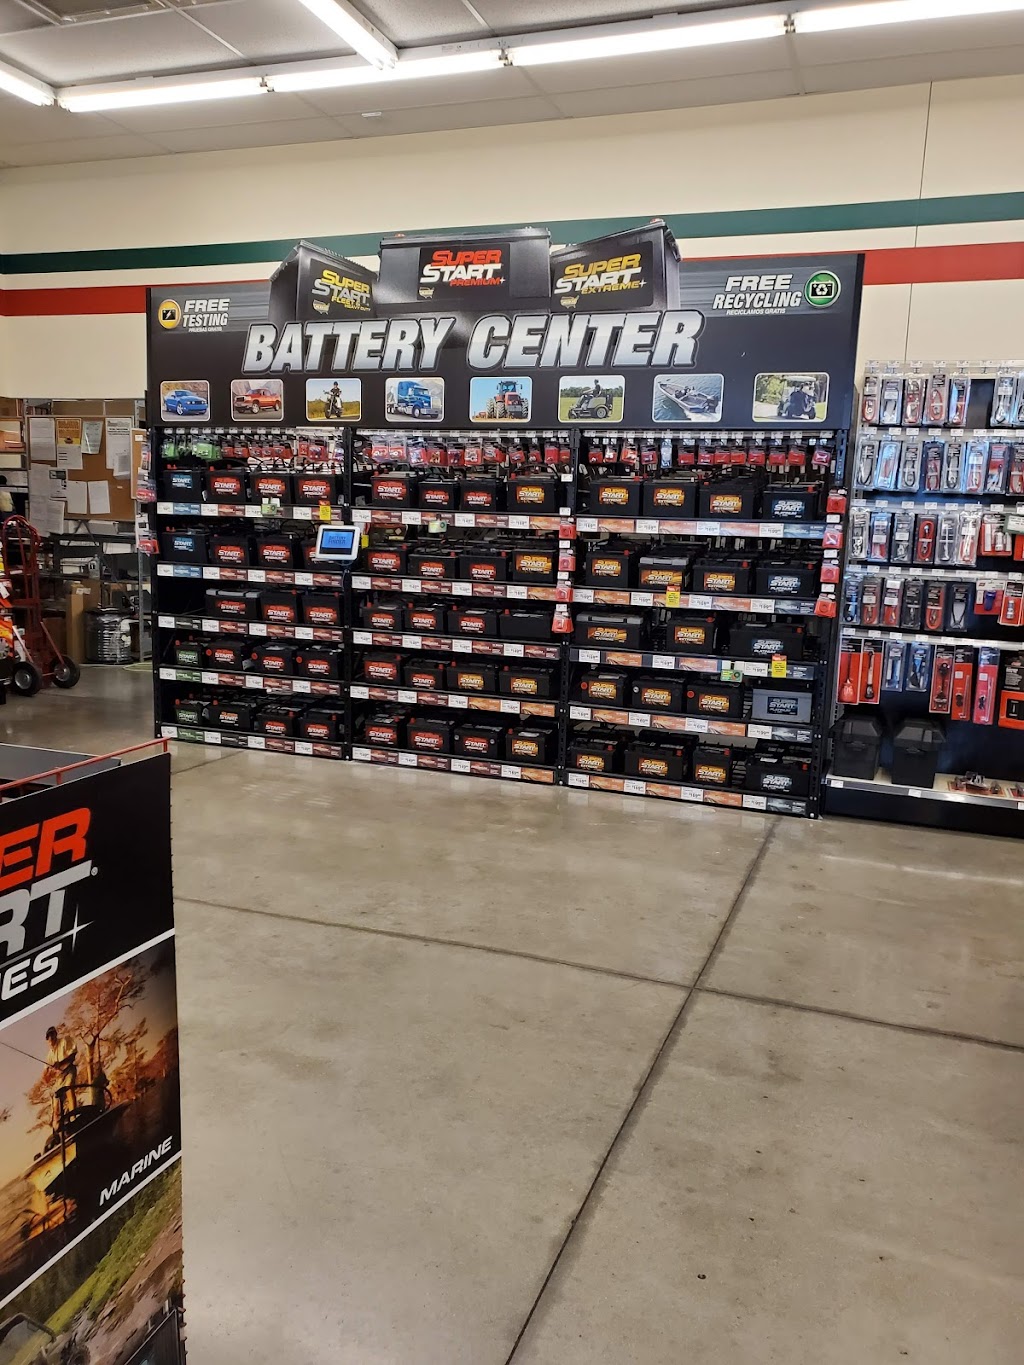 OReilly Auto Parts | 2828 Central Dr, Bedford, TX 76021, USA | Phone: (817) 532-5521